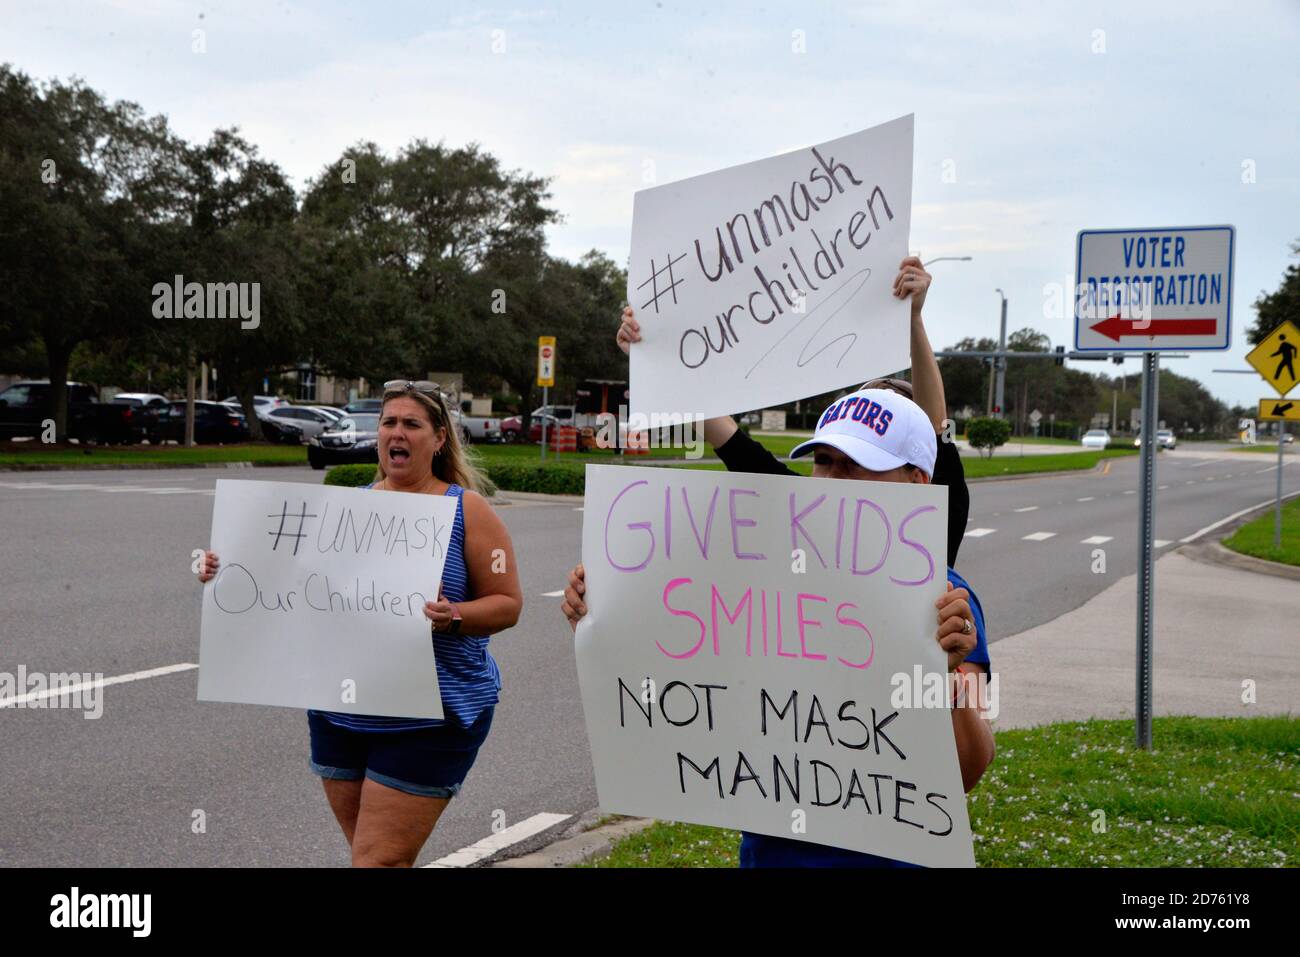 Viera, Brevard County, Florida, USA. October 20, 2020. One week before the Brevard County School Board meeting a group has already started to protest outside the school board building. The group wants the board to rescind the mandatory face mask requirement for students due to the Corona 19 virus. Credit: Julian Leek/Alamy Live News Stock Photo